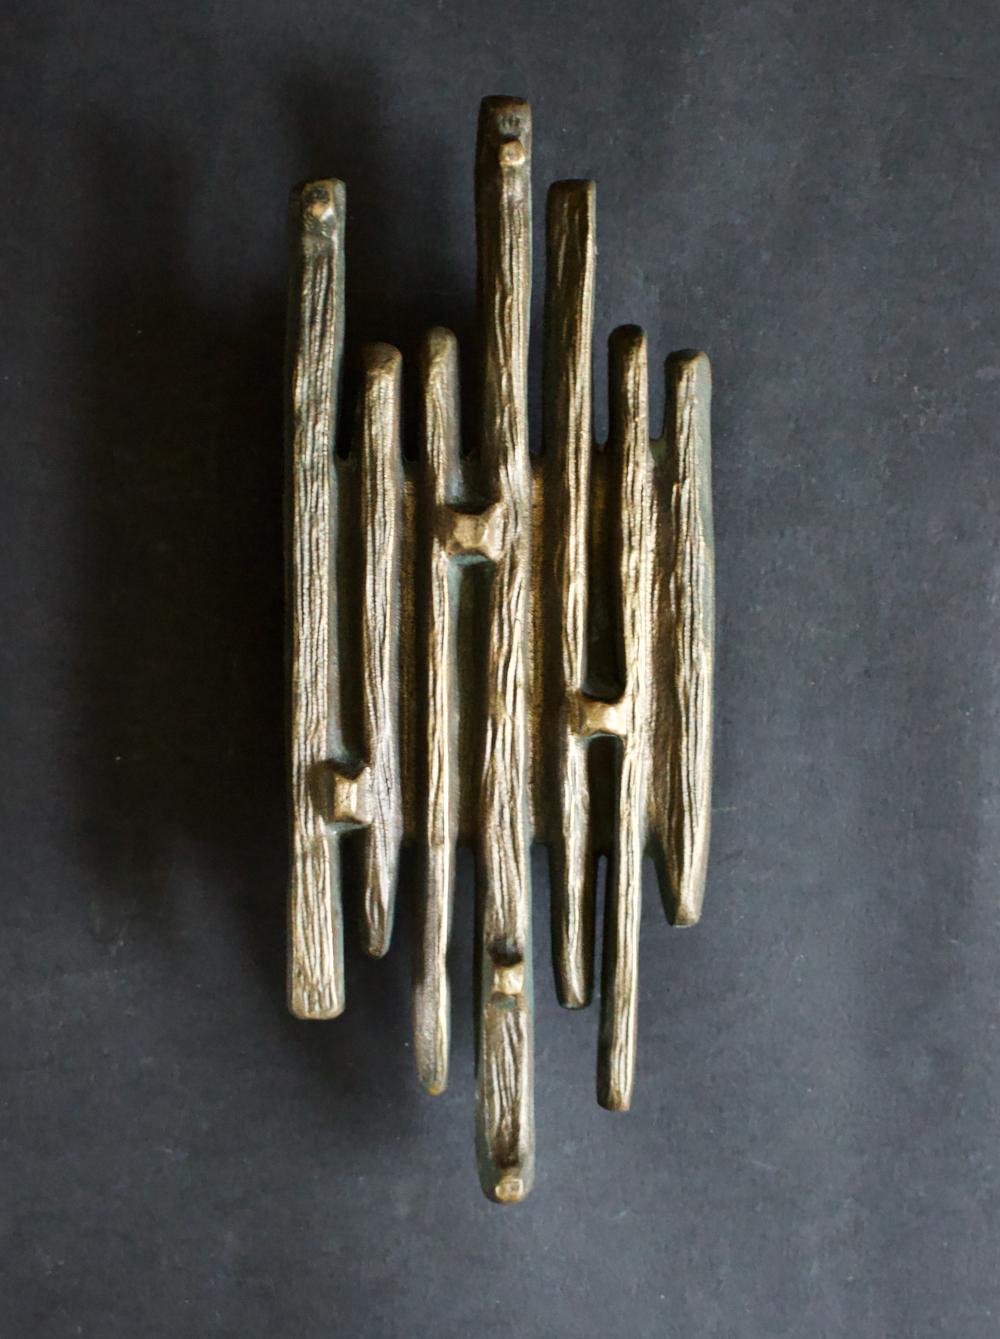 A large bronze door handle in abstract brutalist design. Mid-20th century, European.

This is a heavy piece, made of patinated cast bronze, with varying tones - dark brown, green, gold - from age and use. The handle can be used on exterior or